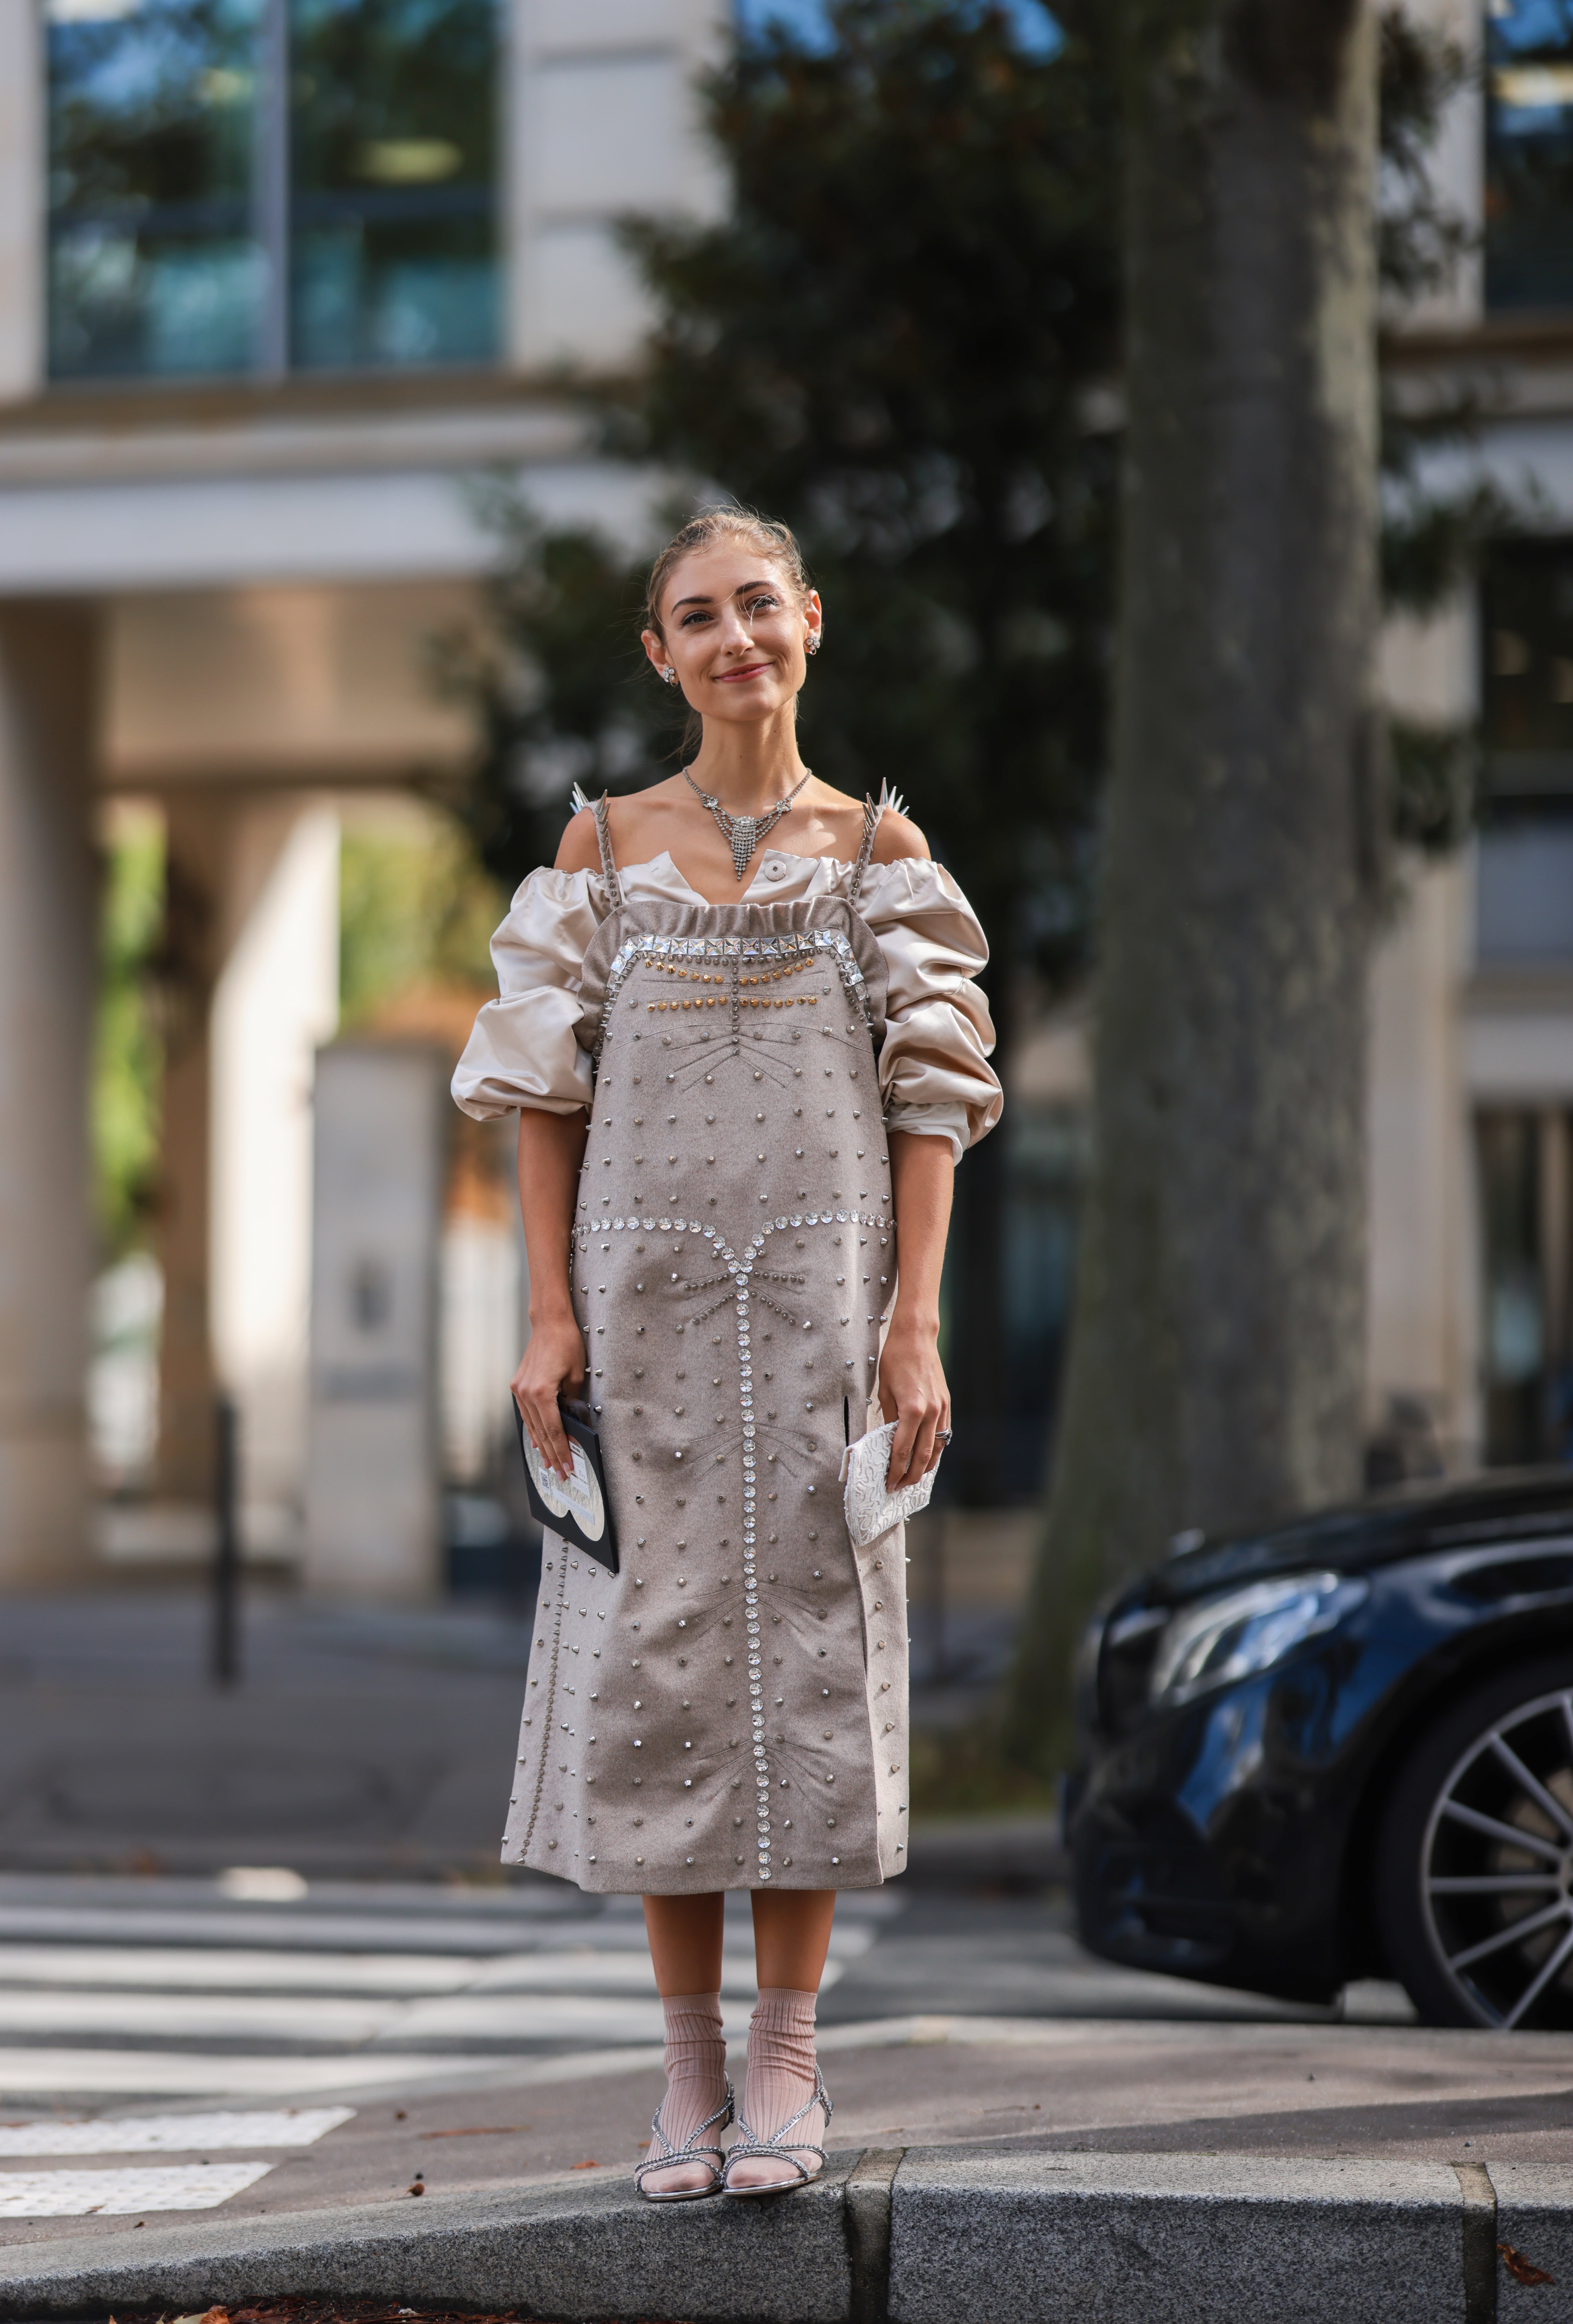 15 Fresh and Creative Ways to Style Midi Dresses For Winter